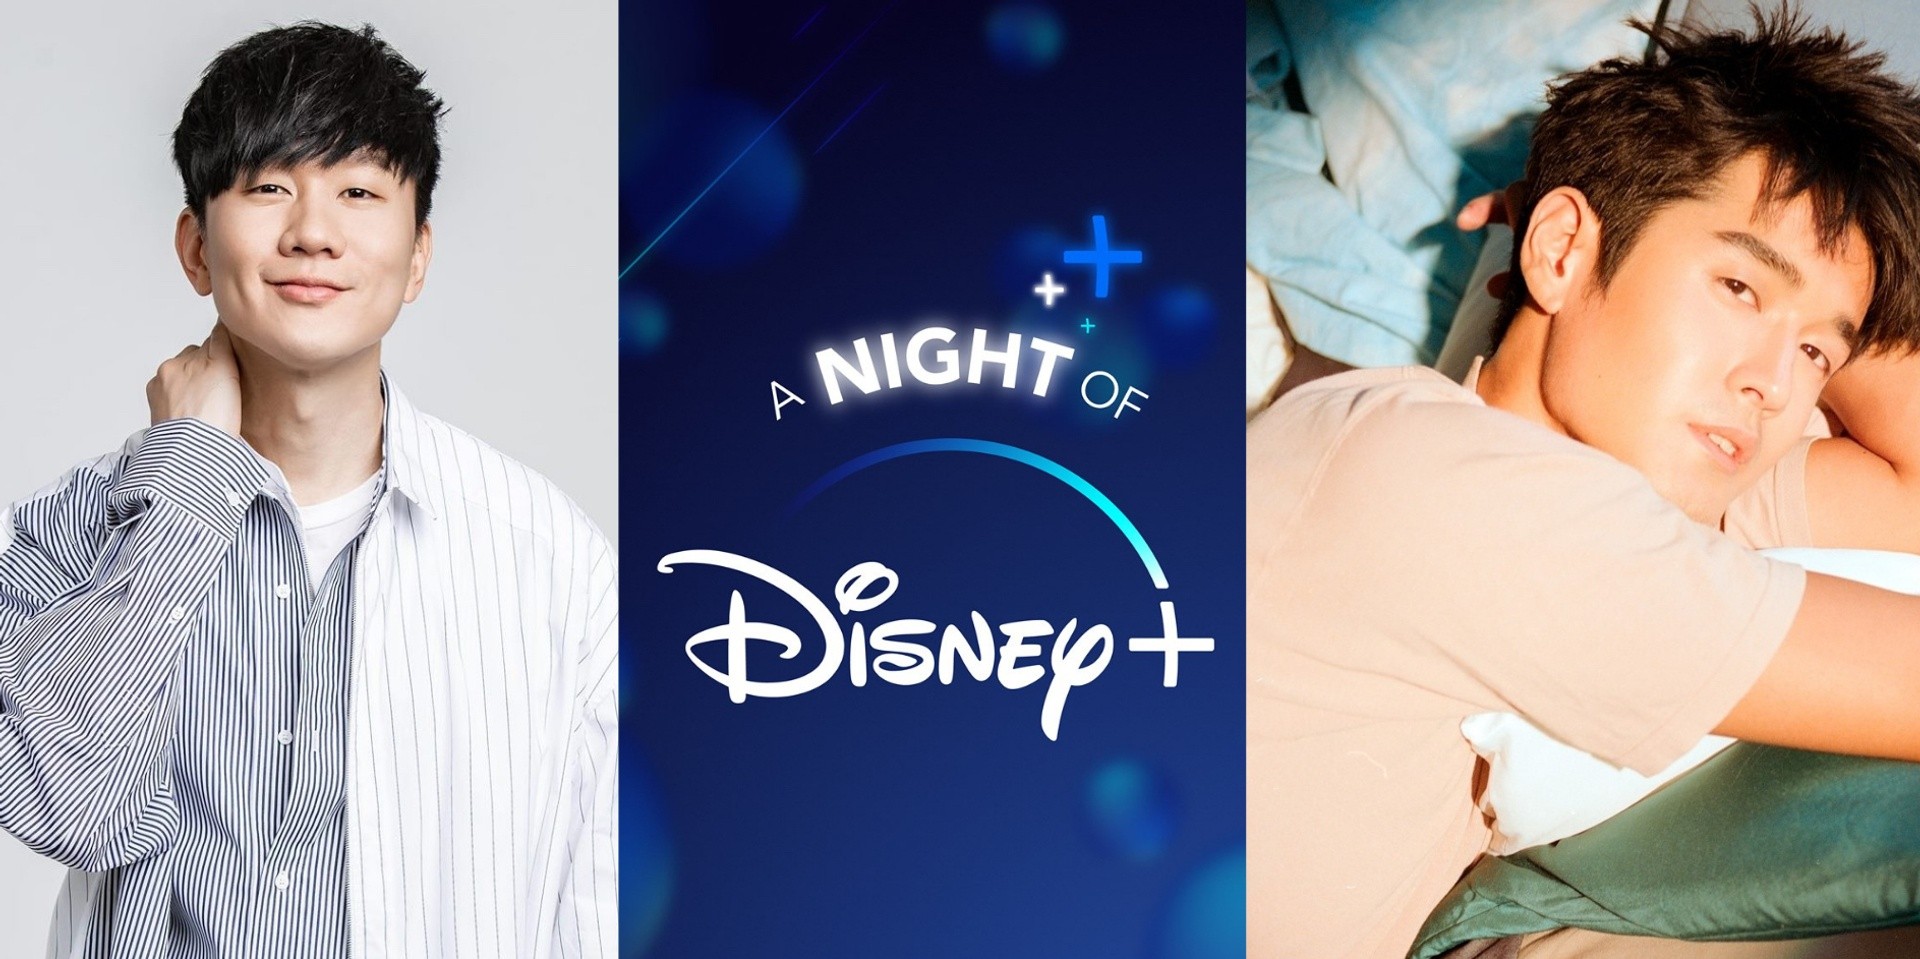 JJ Lin, Nathan Hartono, and more to perform at Disney+ launch event in Singapore